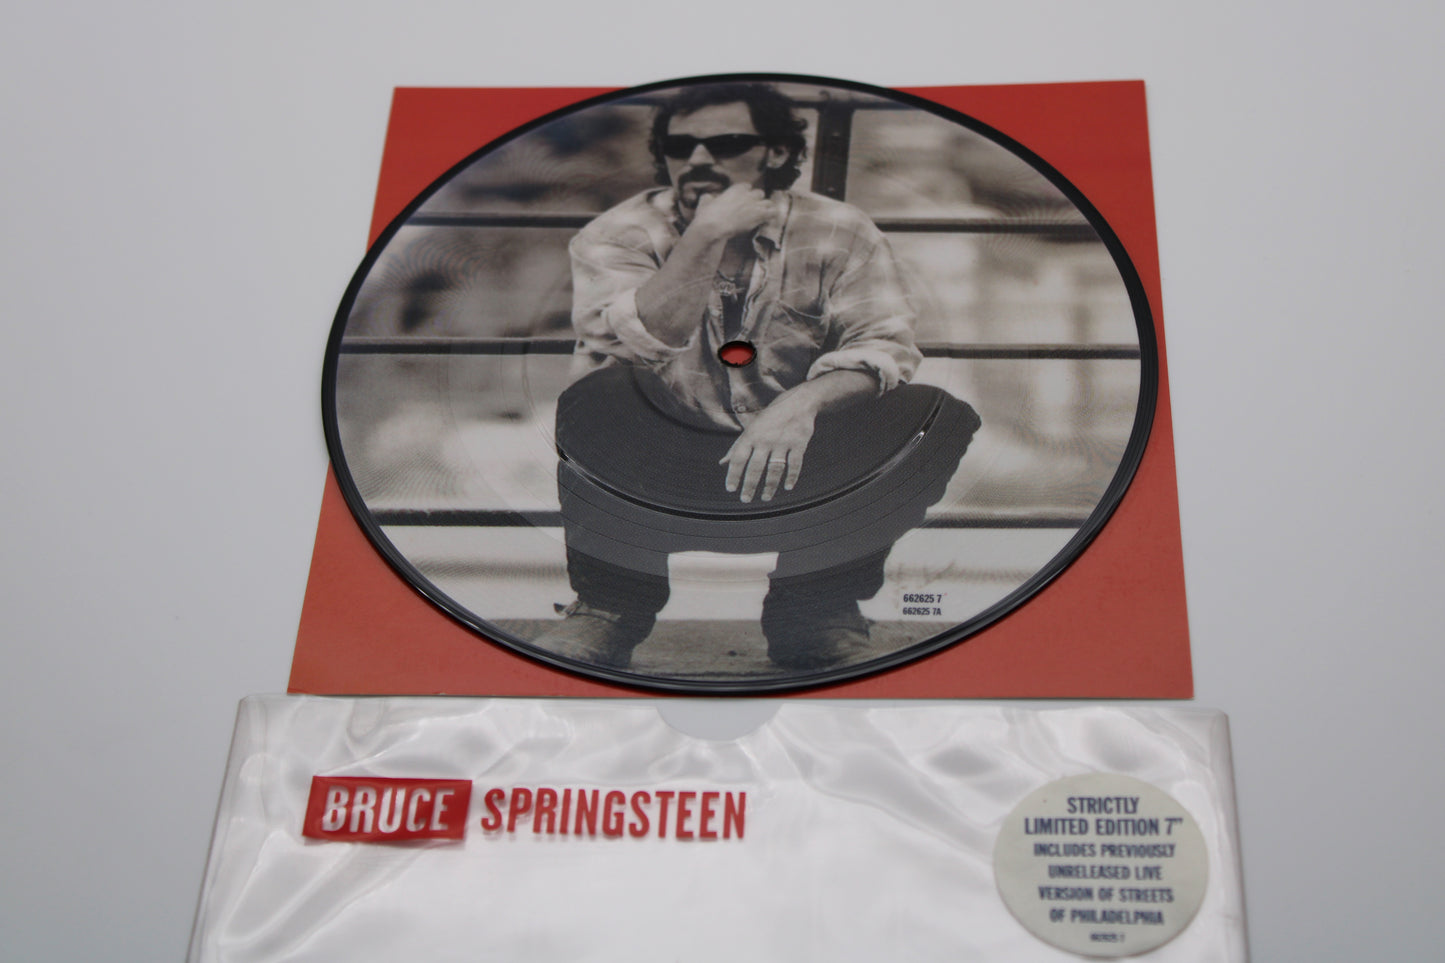 Bruce Springsteen 7" Picture Vinyl Streets of Philadelphia LIVE & Hungry Heart Ltd. Ed. & # Collectible